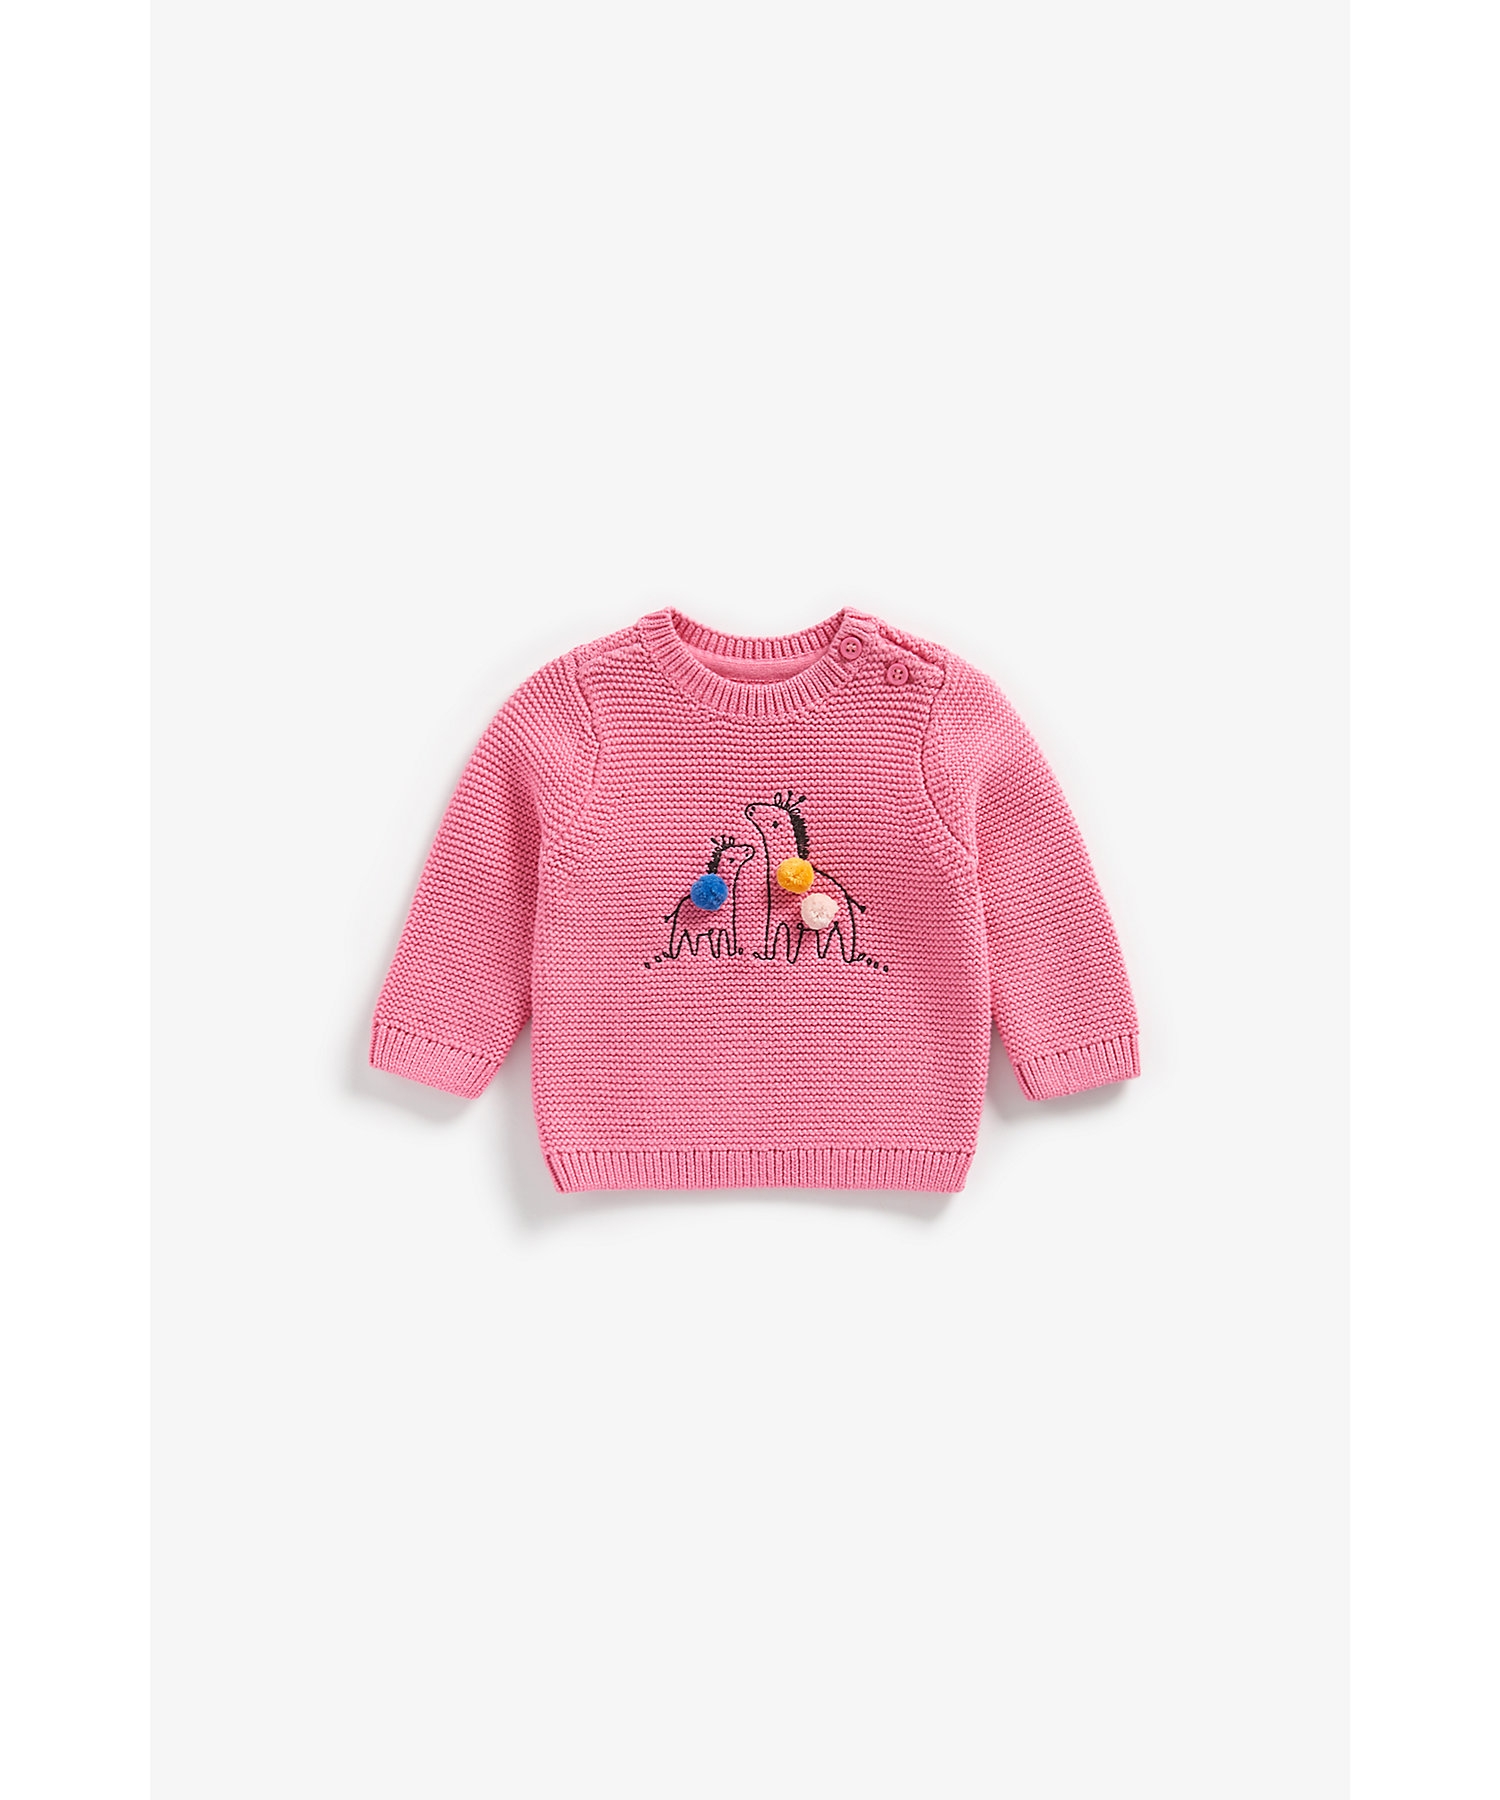 Mothercare | Girls Full Sleeves Sweater Zebra Embroidery And Pom Pom Details - Pink 0